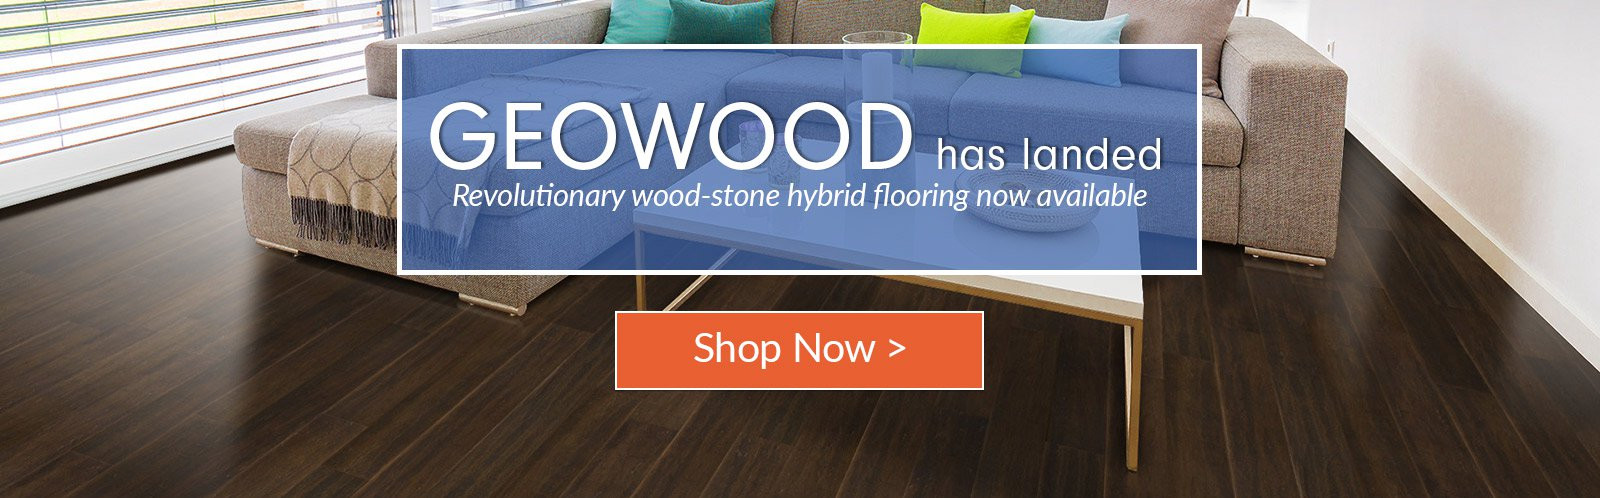 26 Unique Maine Traditions Hardwood Flooring Prices 2024 free download maine traditions hardwood flooring prices of green building construction materials and home decor cali bamboo intended for geowood launch homepage slider